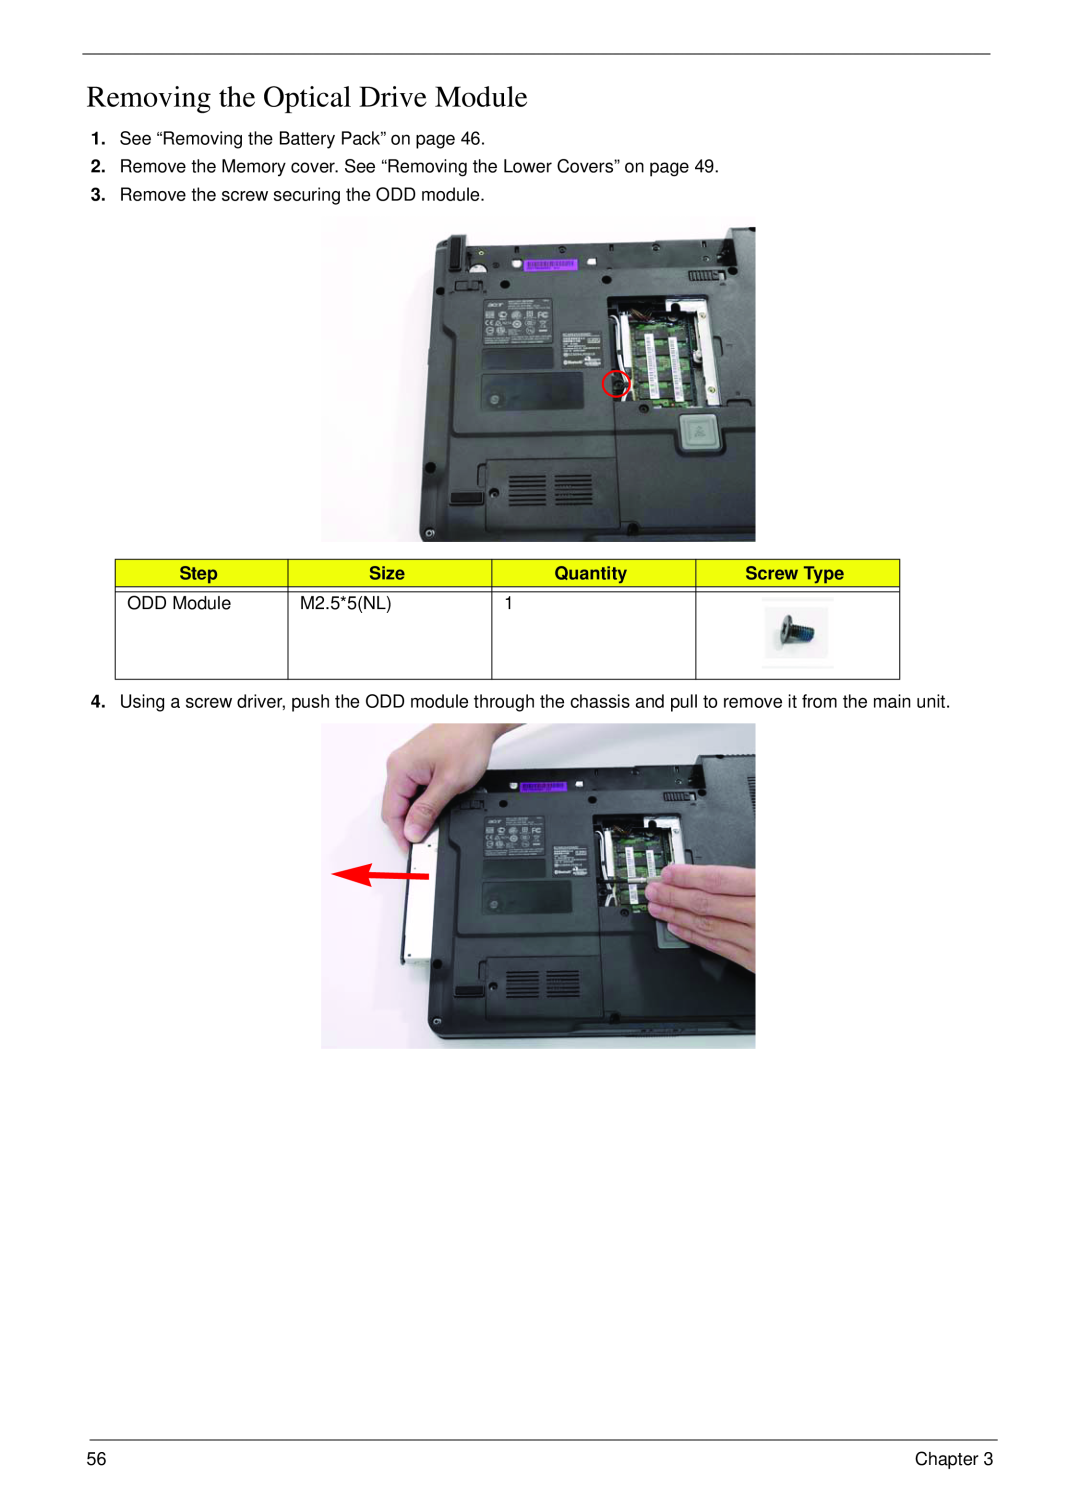 Acer 4730 manual Removing the Optical Drive Module, Step, Size, Quantity, Screw Type, ODD Module, M2.5*5NL 